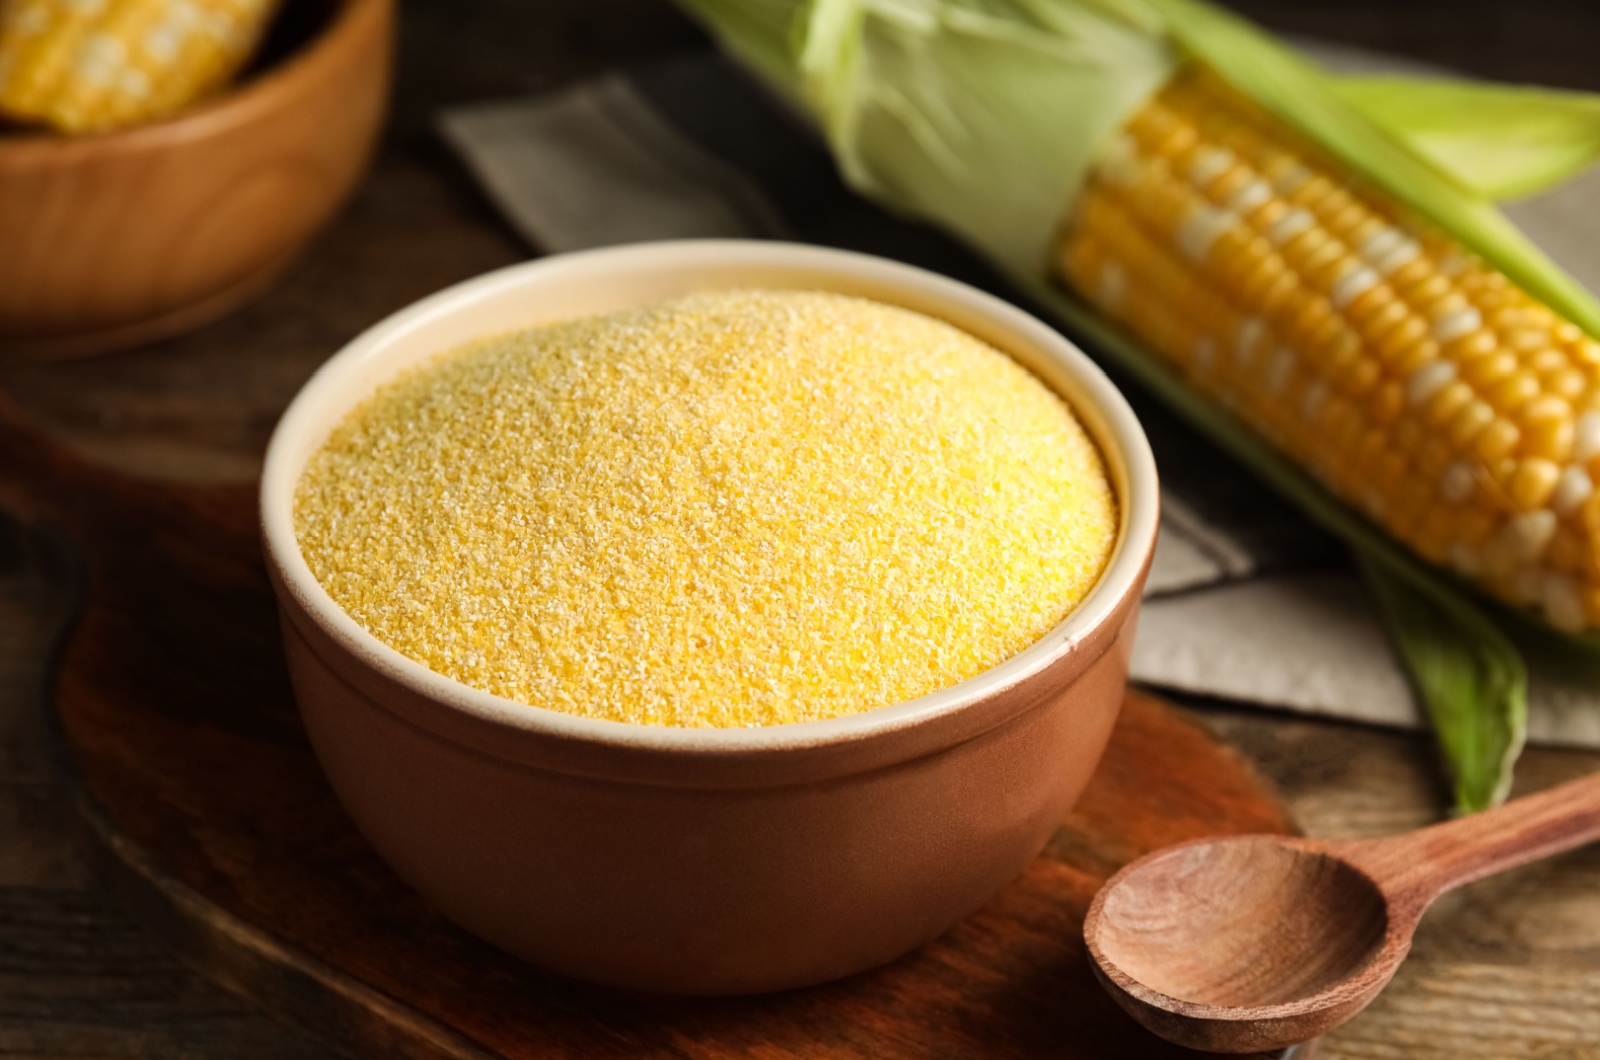 Cornmeal in bowl on wooden table